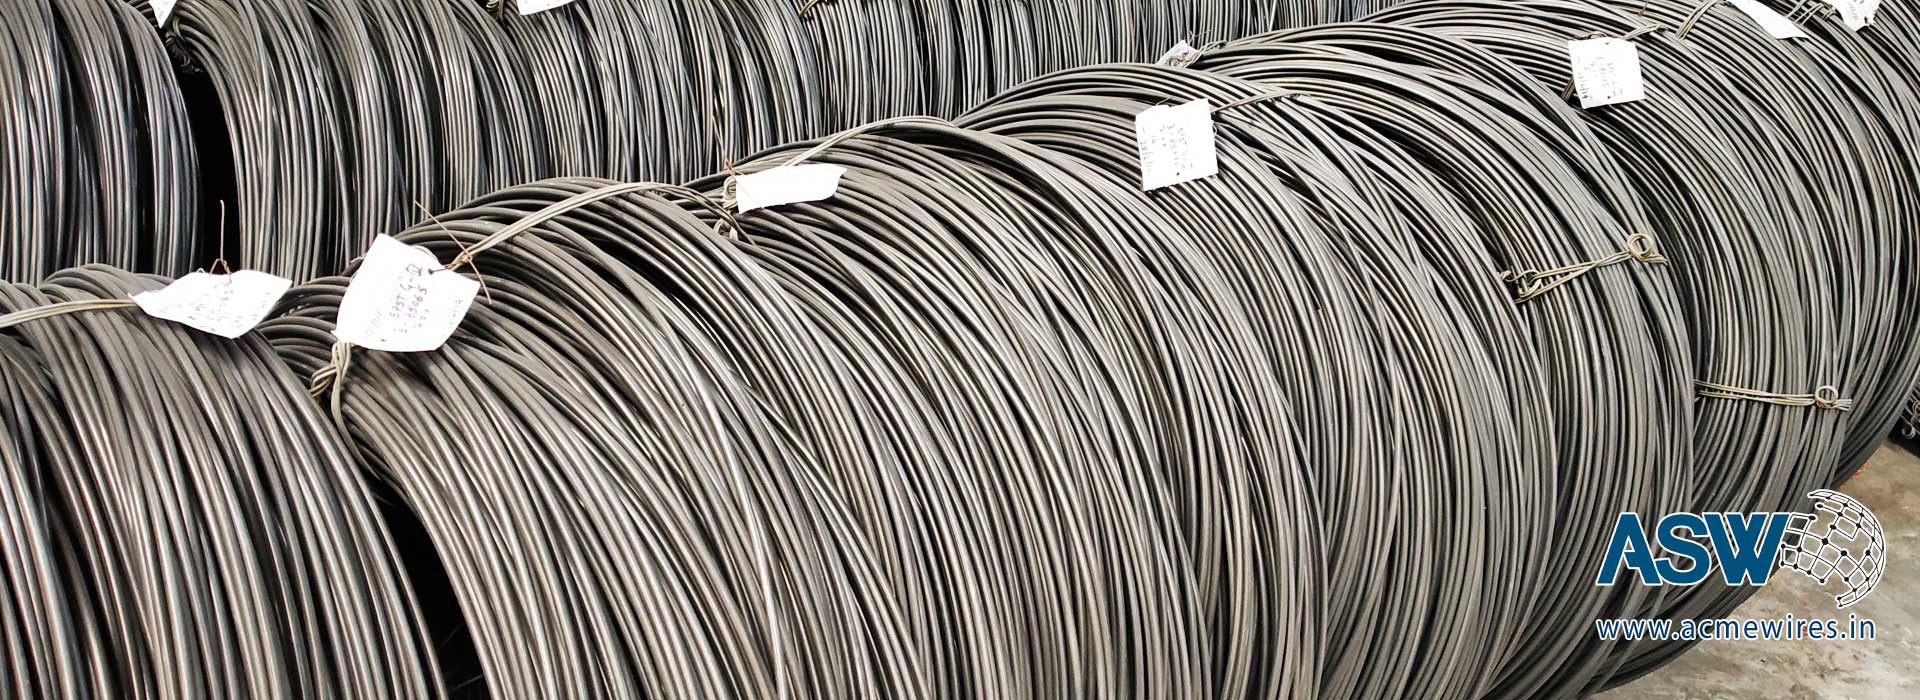 Spring Steel Wires Annealed Steel Wires manufacturers exporters India Punjab Ludhiana